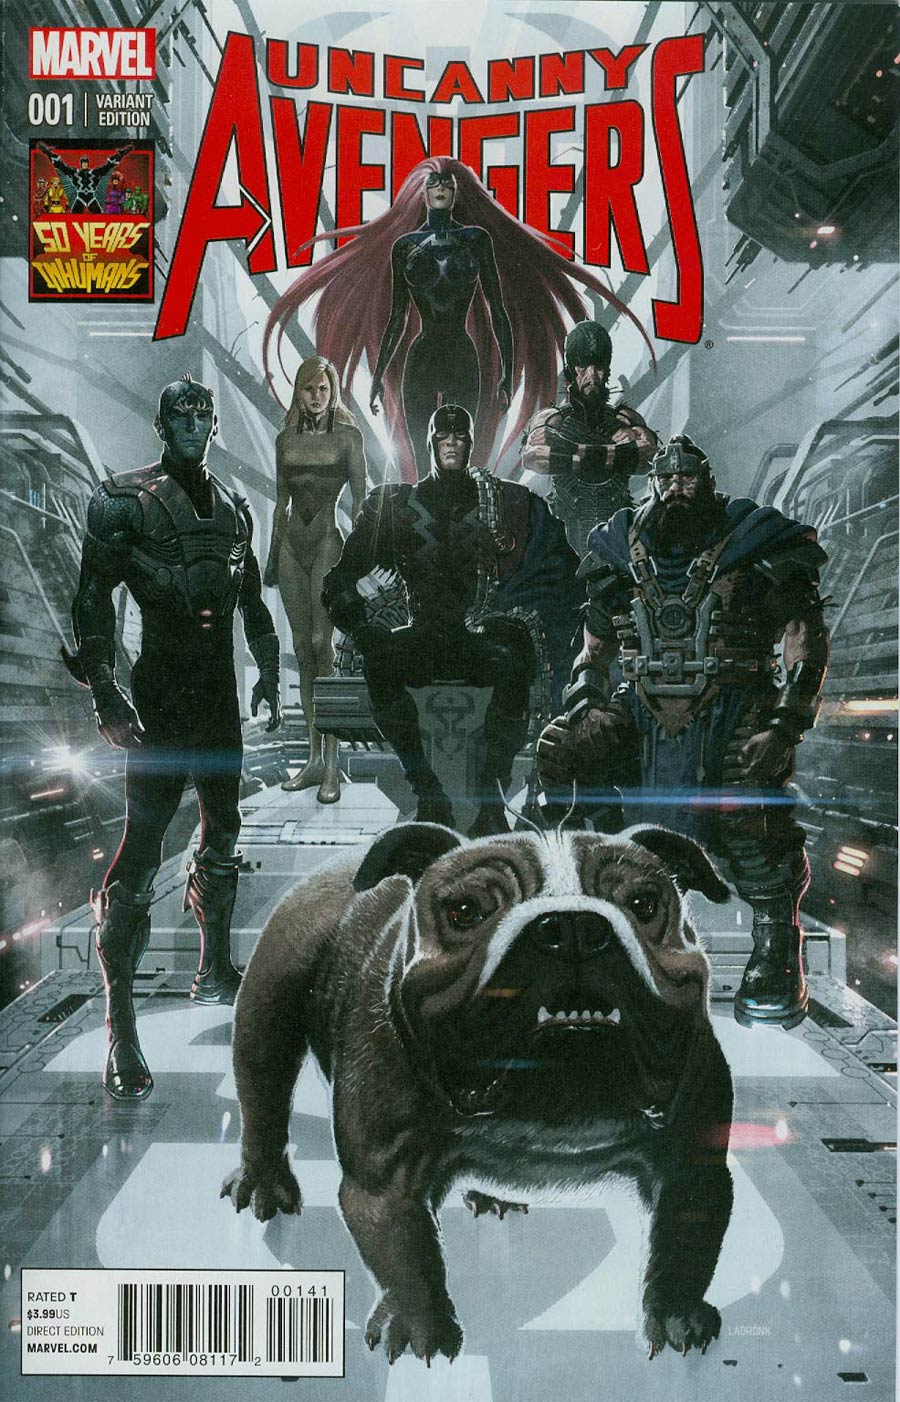 Uncanny Avengers Vol 2 #1 Cover F Incentive Ladronn Inhuman 50th Anniversary Variant Cover